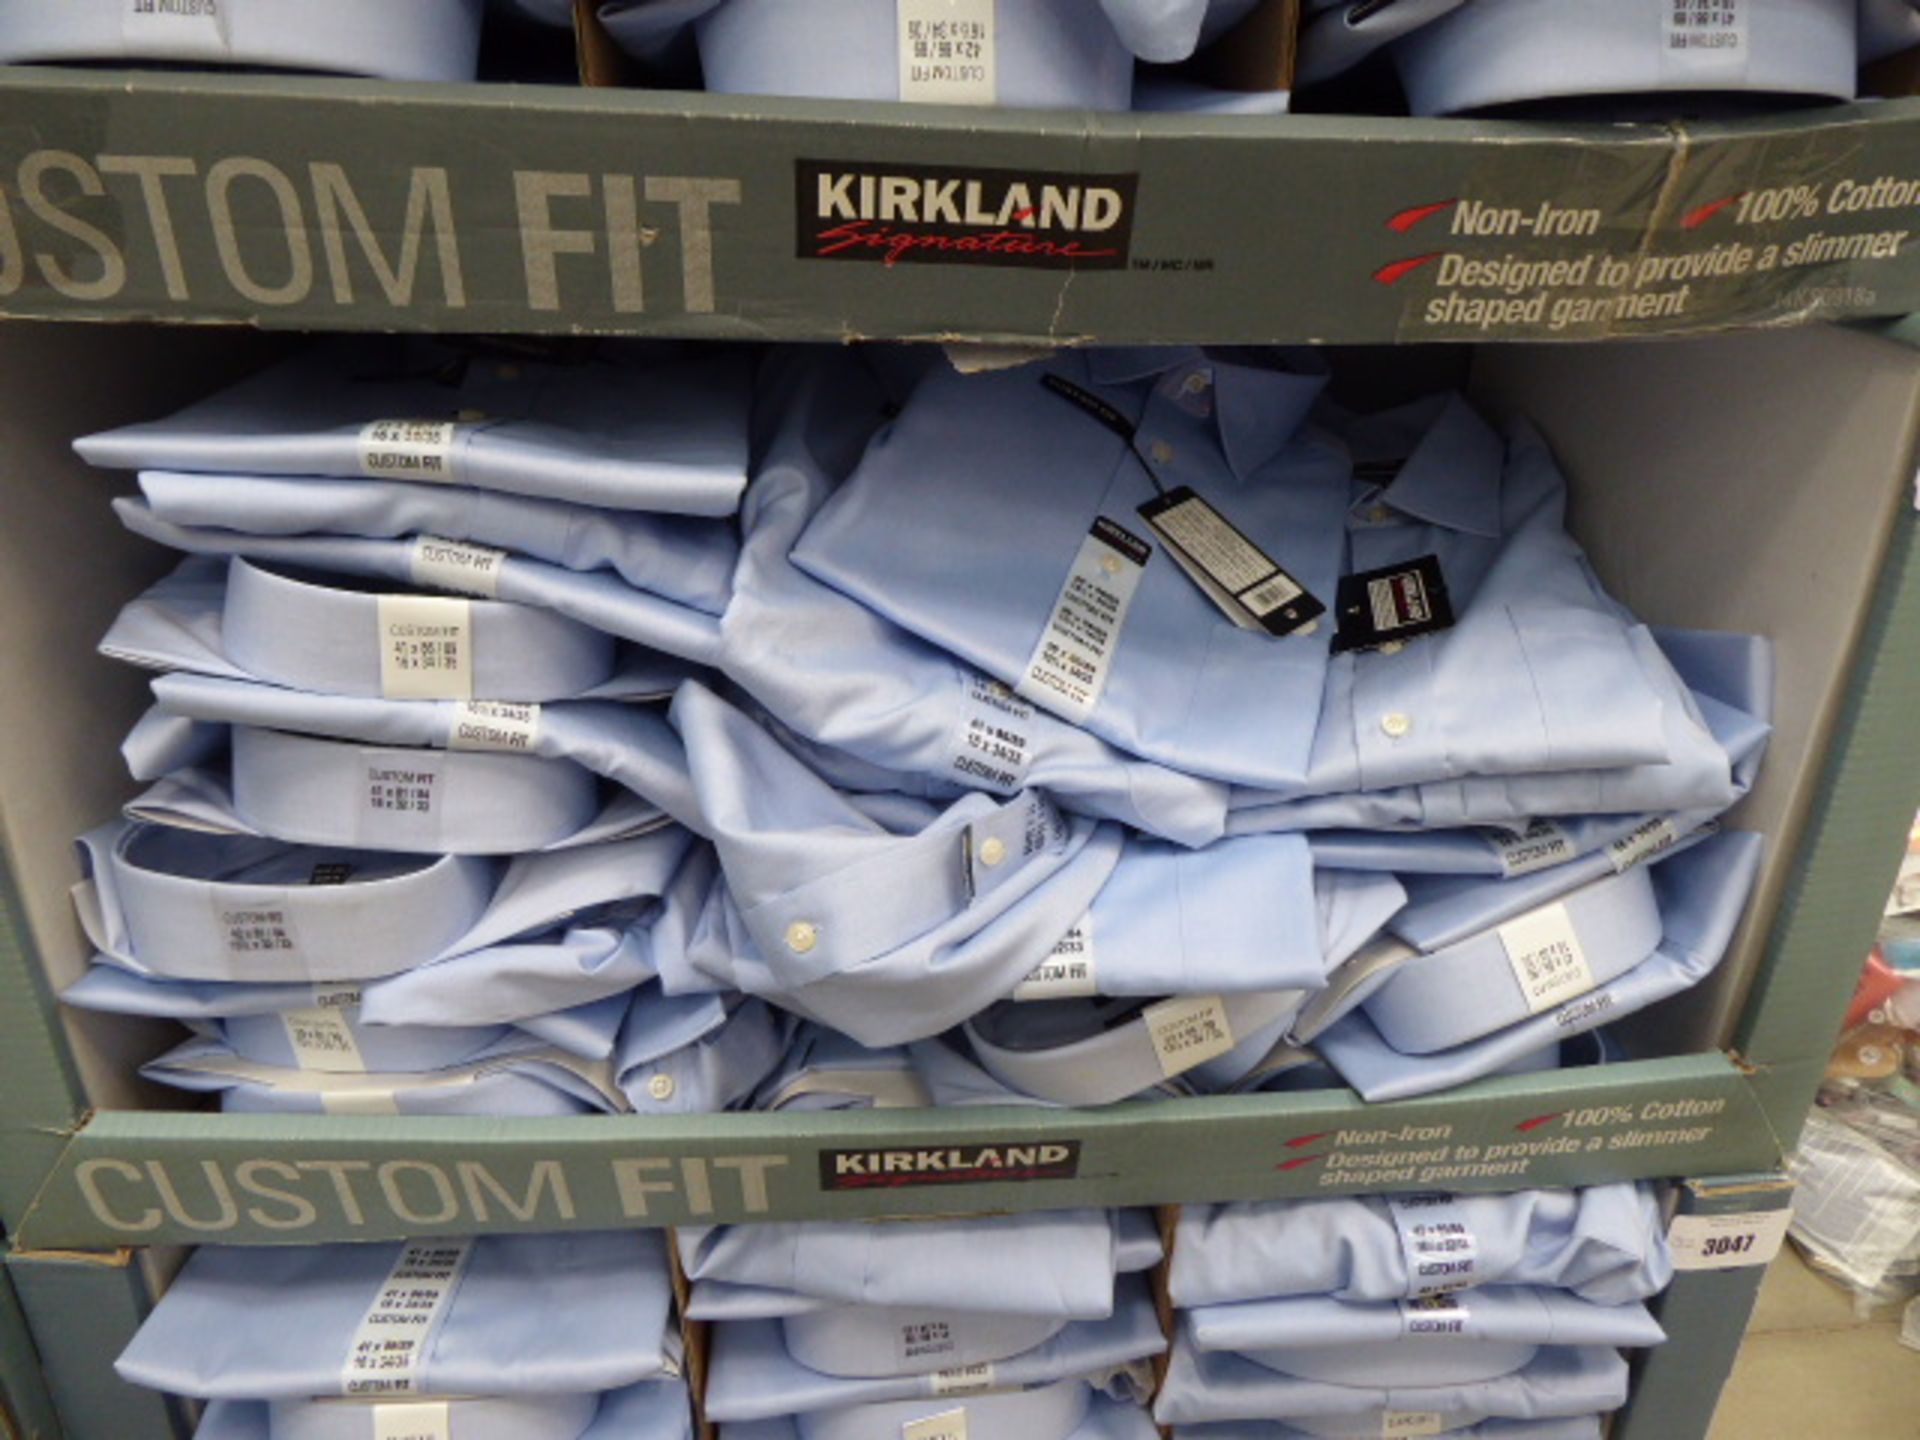 Tray containing approx 32 men's Kirkland custom fit shirts in light blue